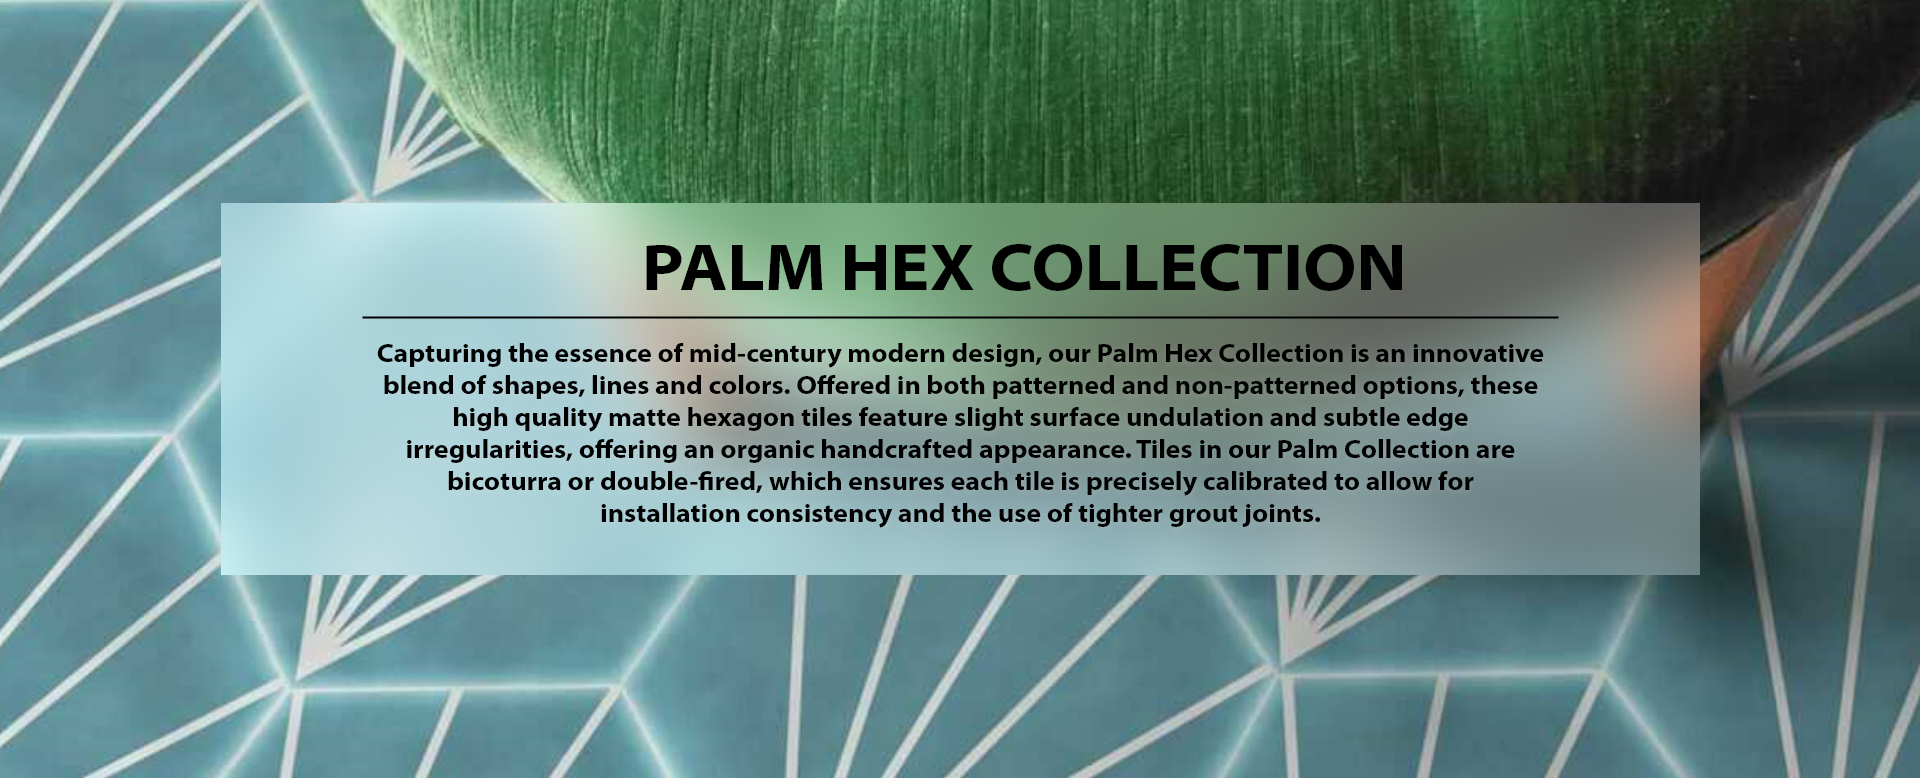 Palm Hex Collection